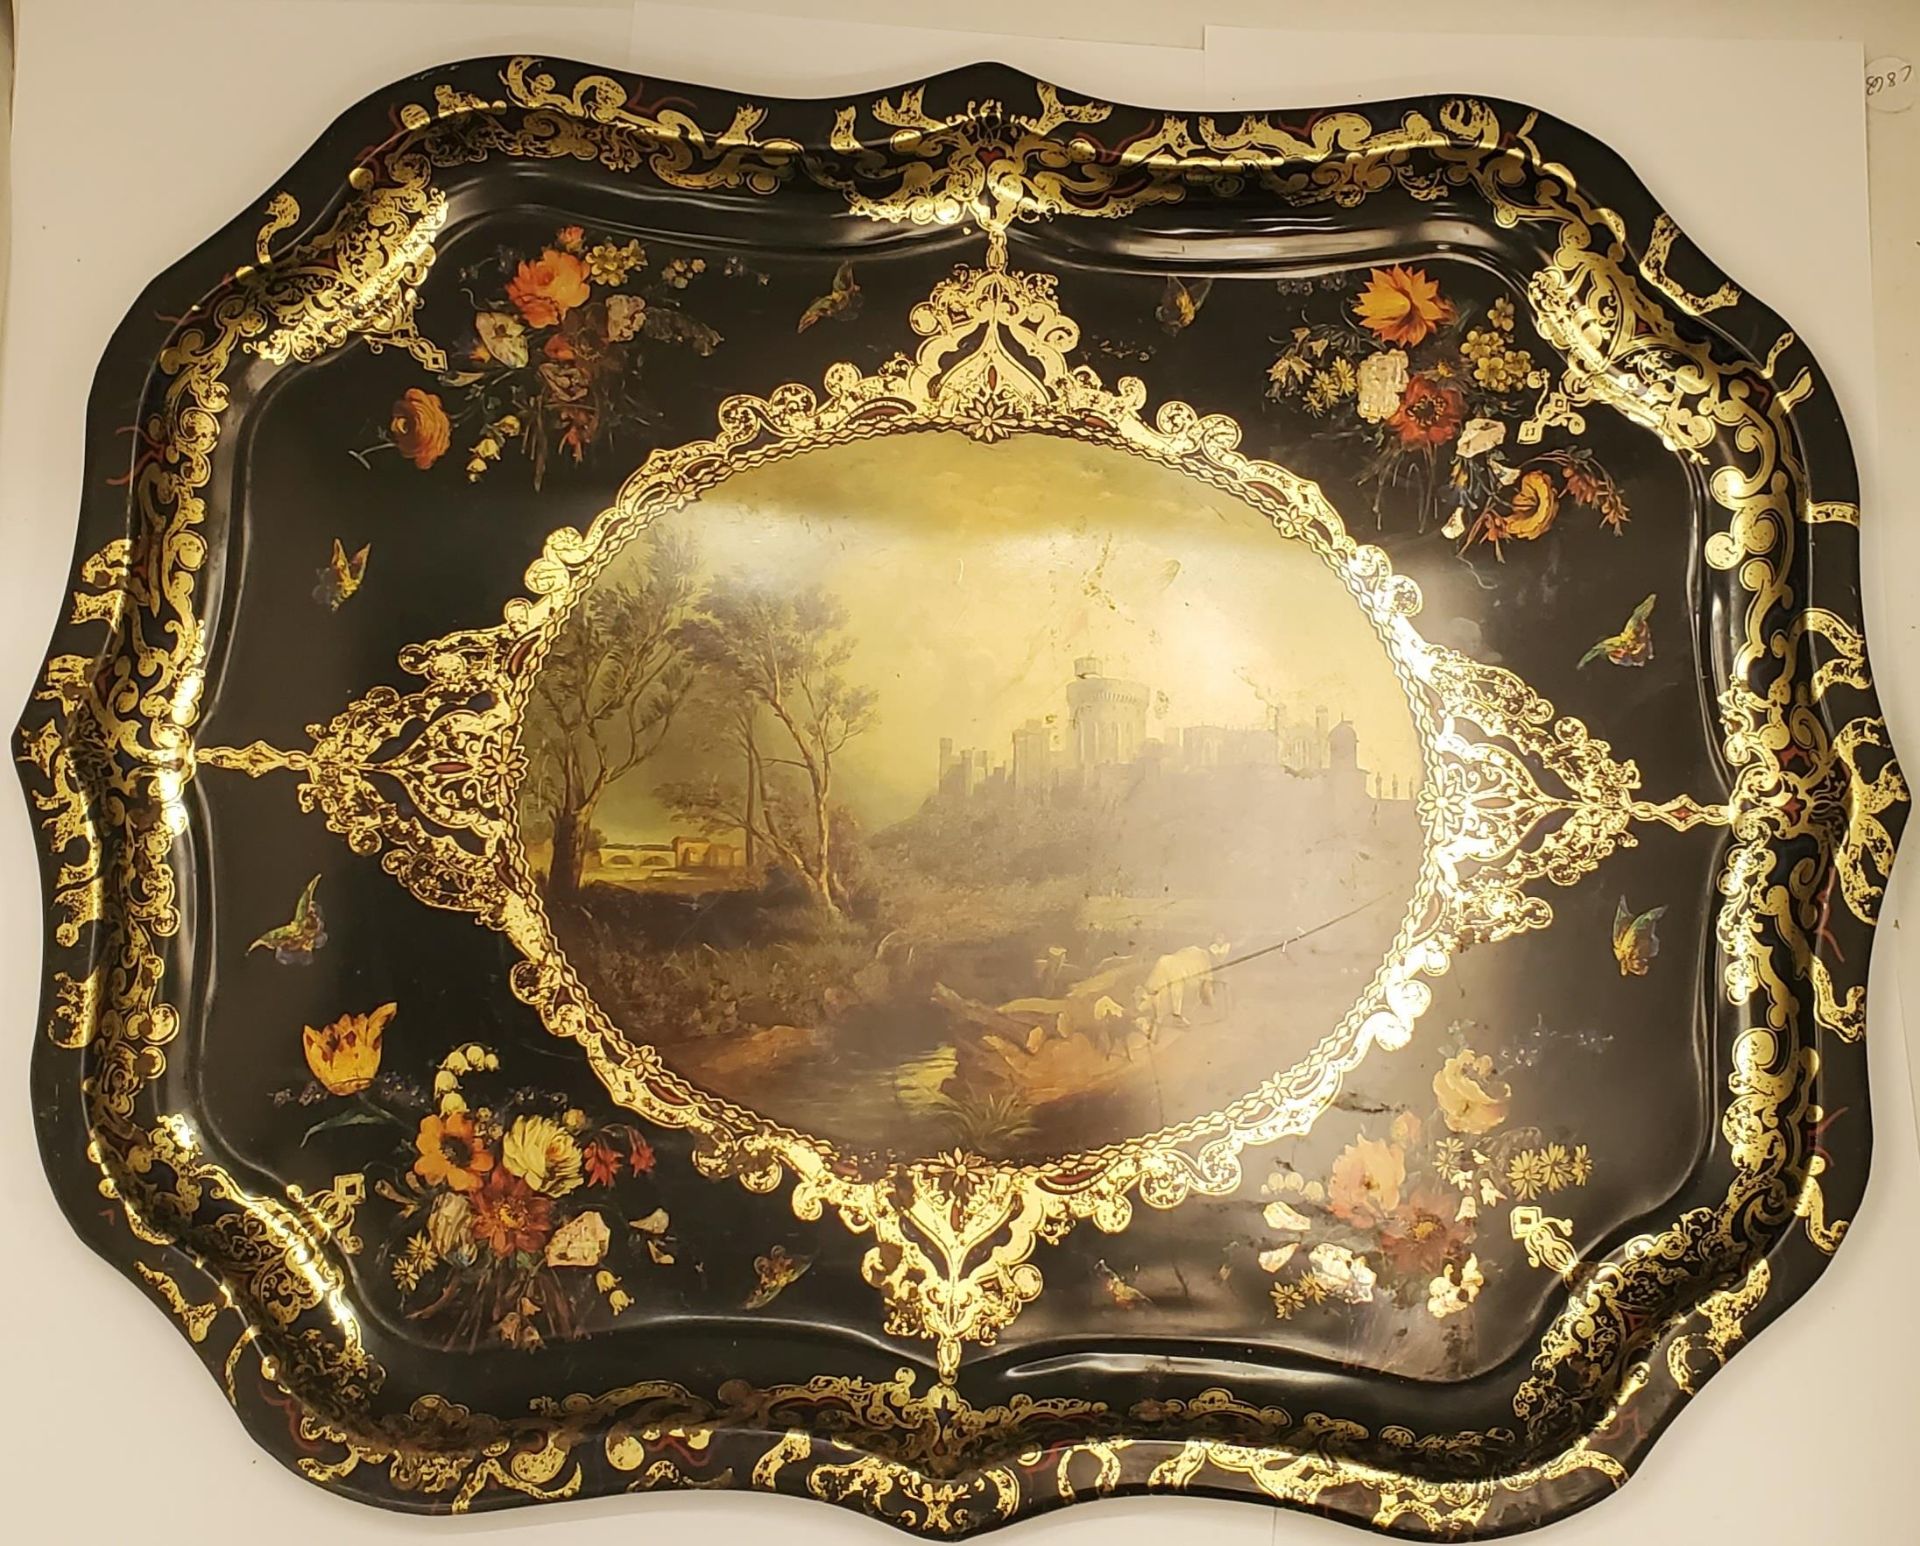 A LARGE VINTAGE METAL TRAY DEPICTING WINDSOR CASTLE FROM THE SOUTH WEST 56CM X 44CM